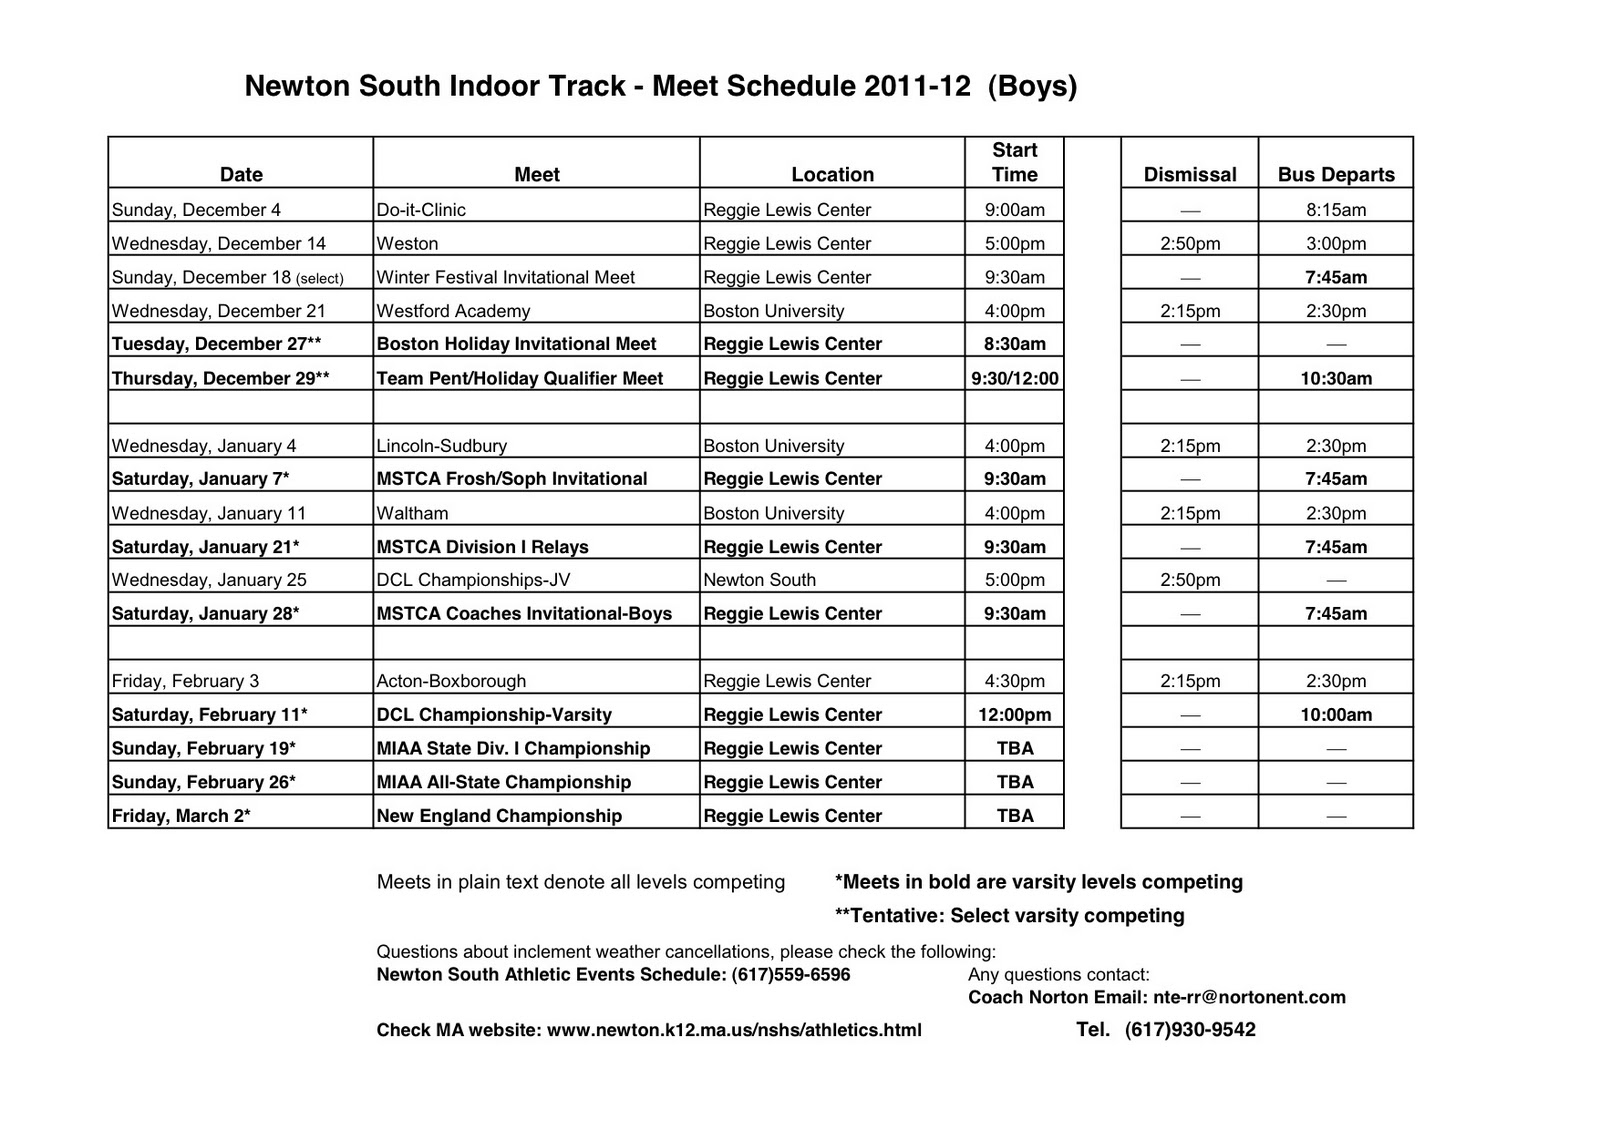 Newton South Running Times 20112012 Newton South Indoor Track and